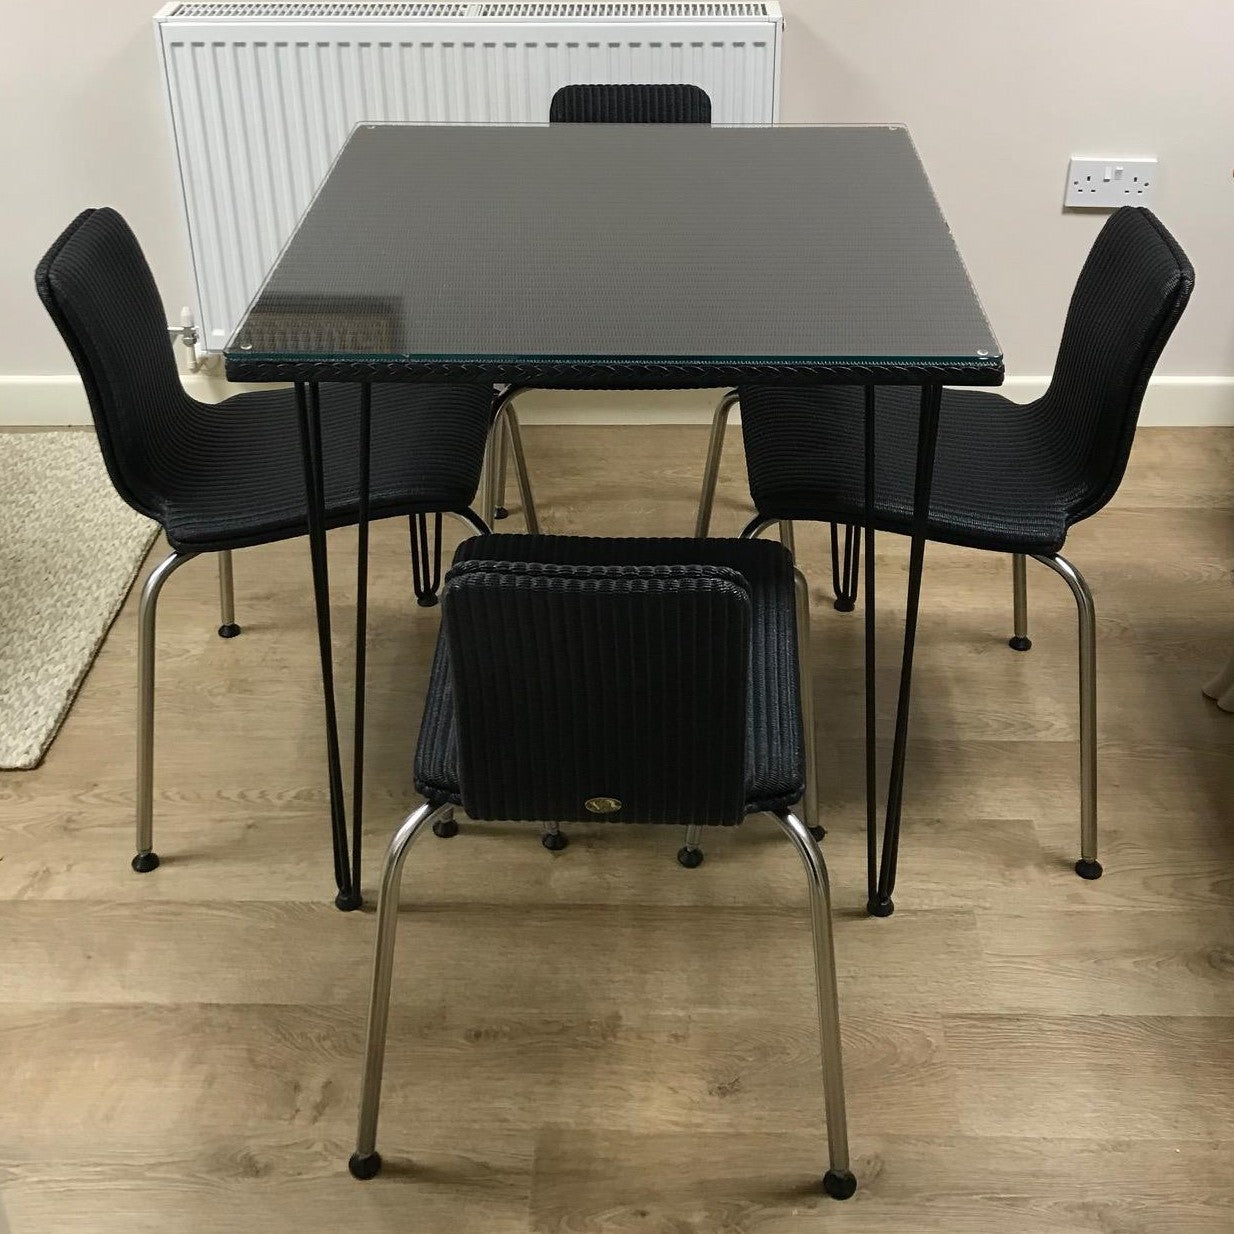 Bistro Square Table with Glass Top and Hairpin legs & 4 x Refurbished Oyster Dining Chairs in Charcoal